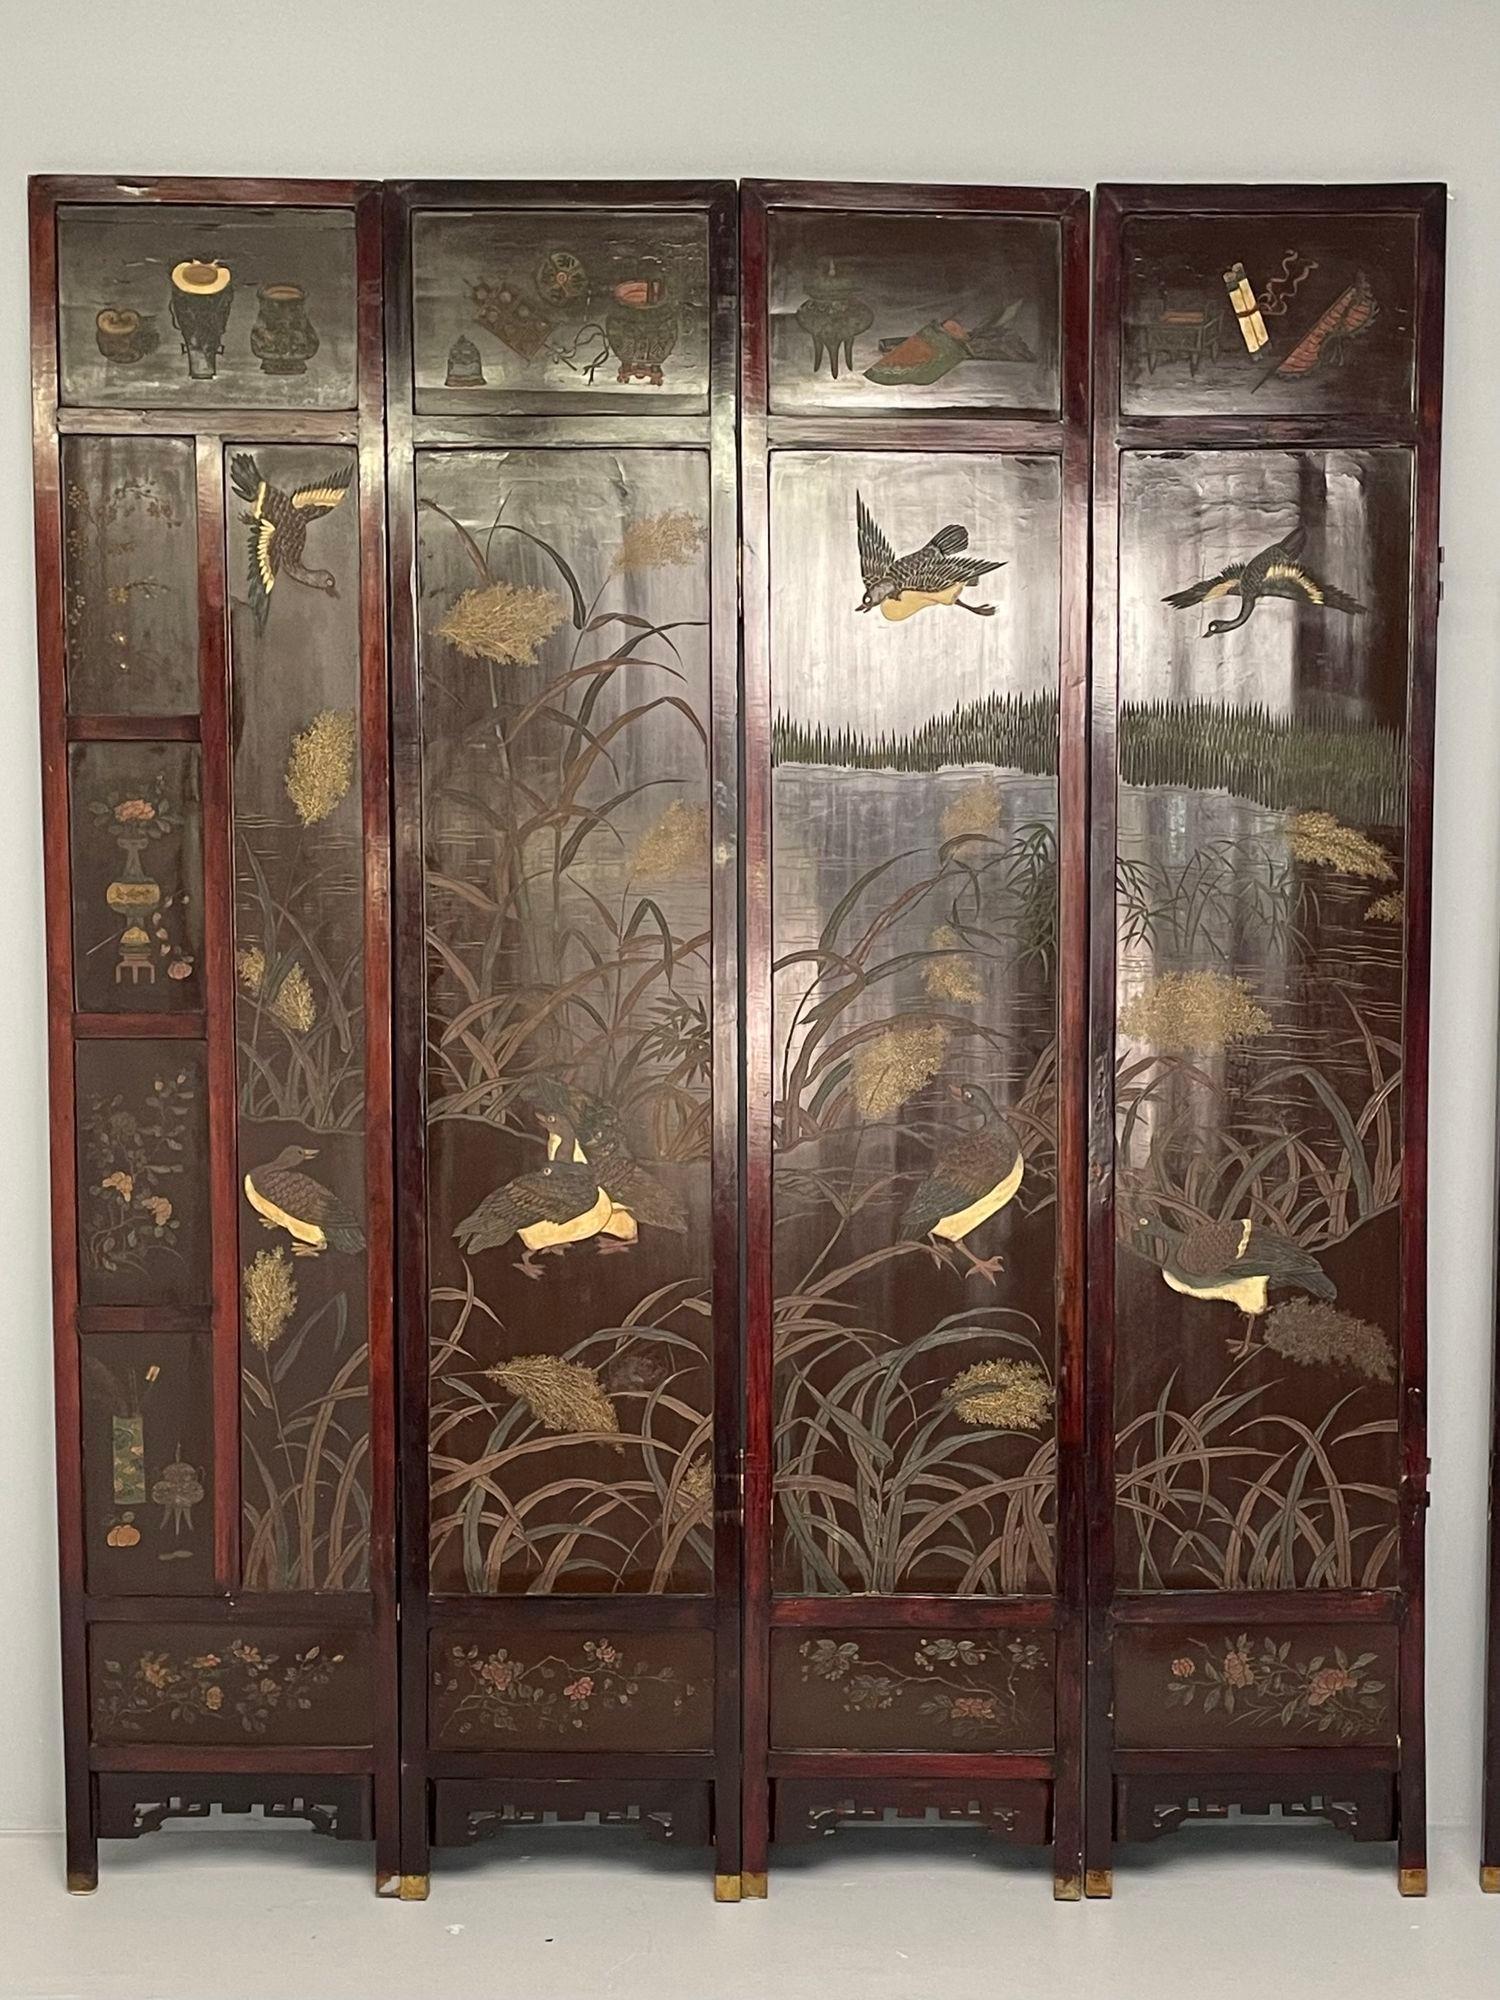 Unusual Eight Panel Chinese Coromandel Screen circa 1700-1800 with Carved Frame For Sale 8